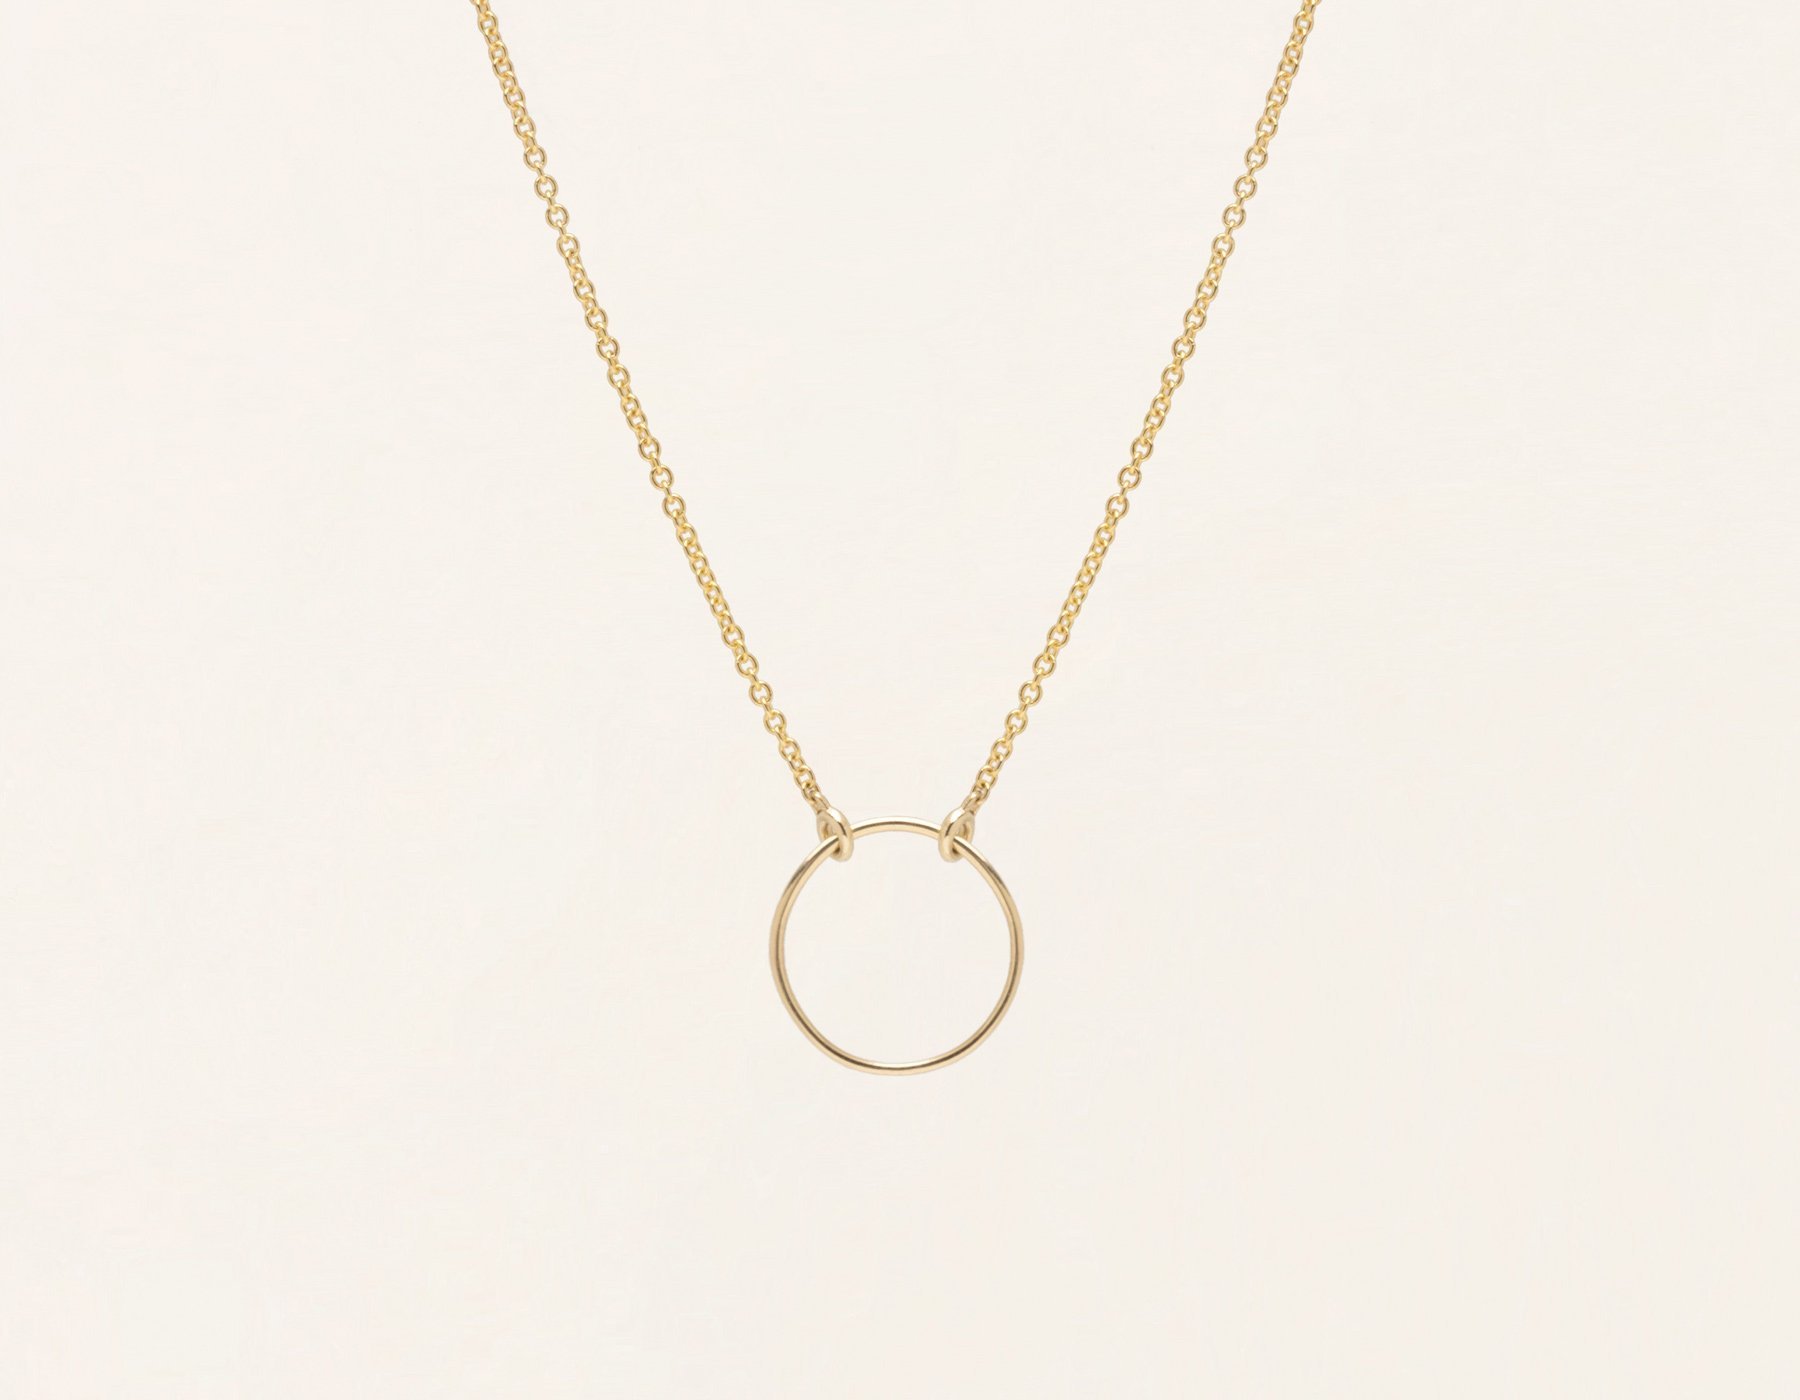 vrai-and-oro-circle-necklace-yellow-gold-p-1_2048x2048.jpg